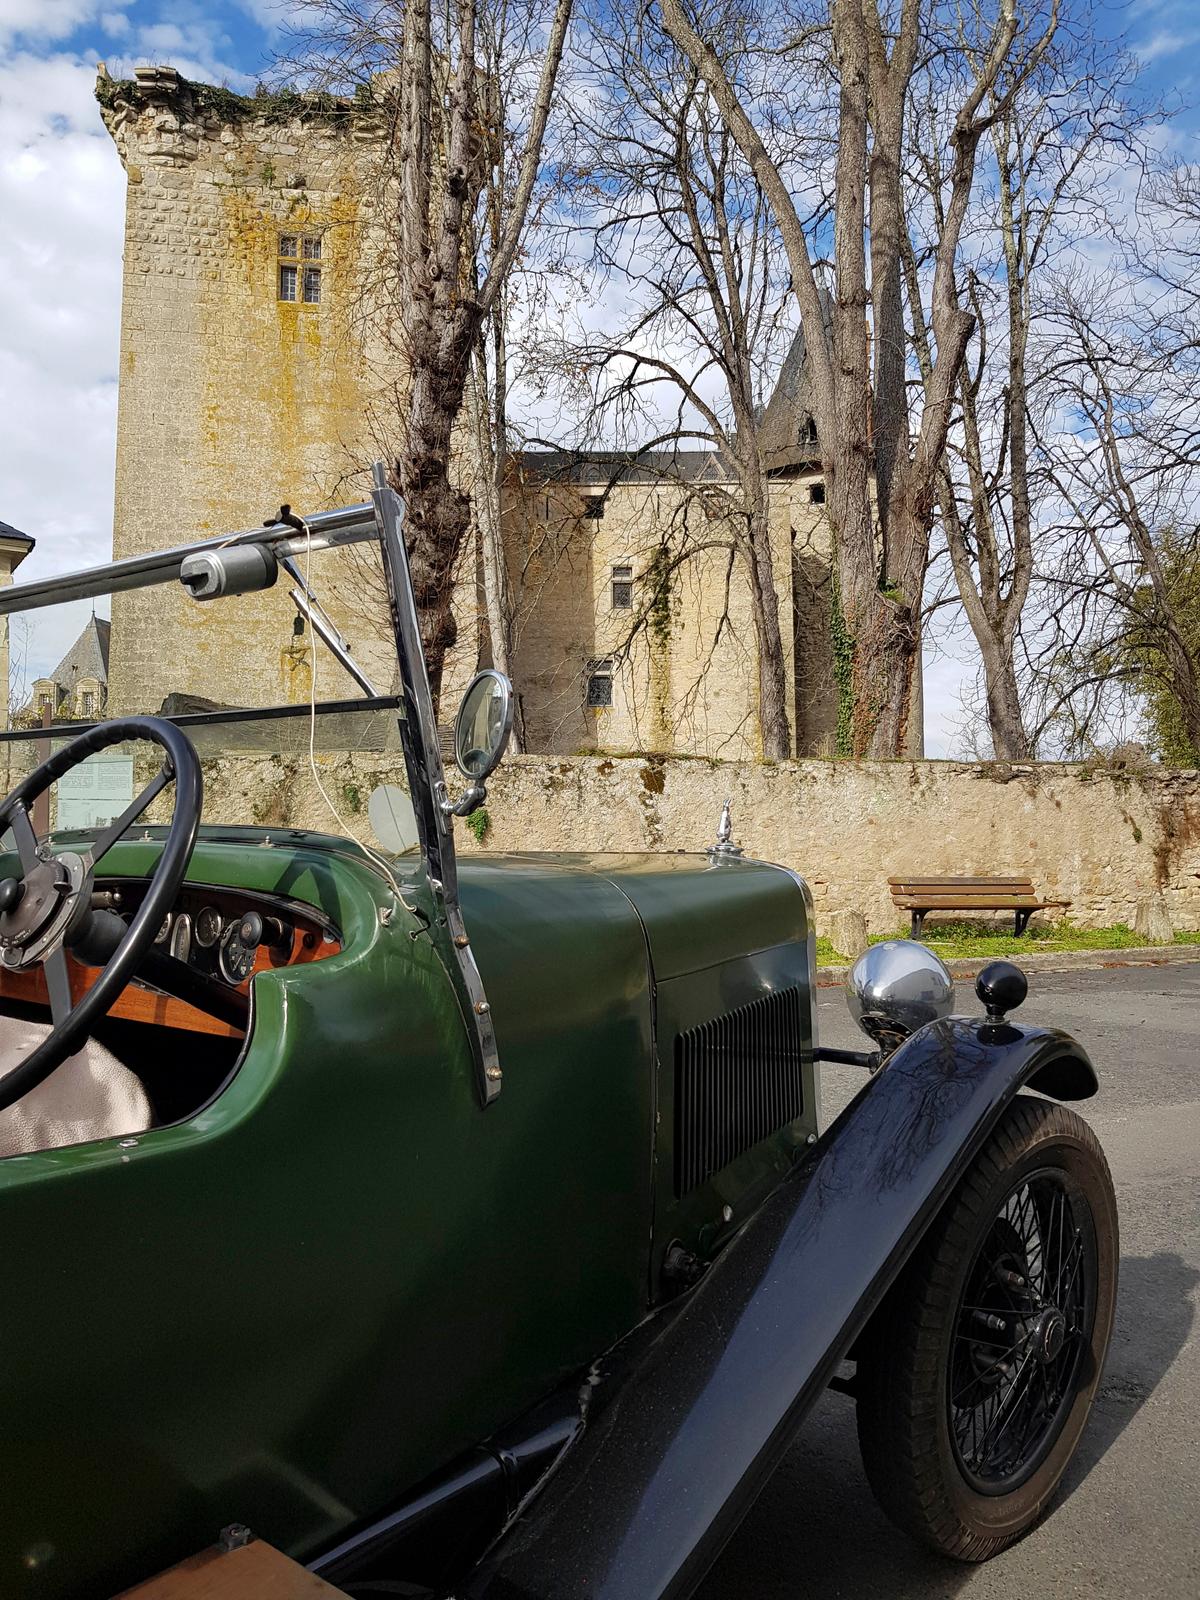 Mark's green Alvis pictured in France. (Courtesy of Caters News)